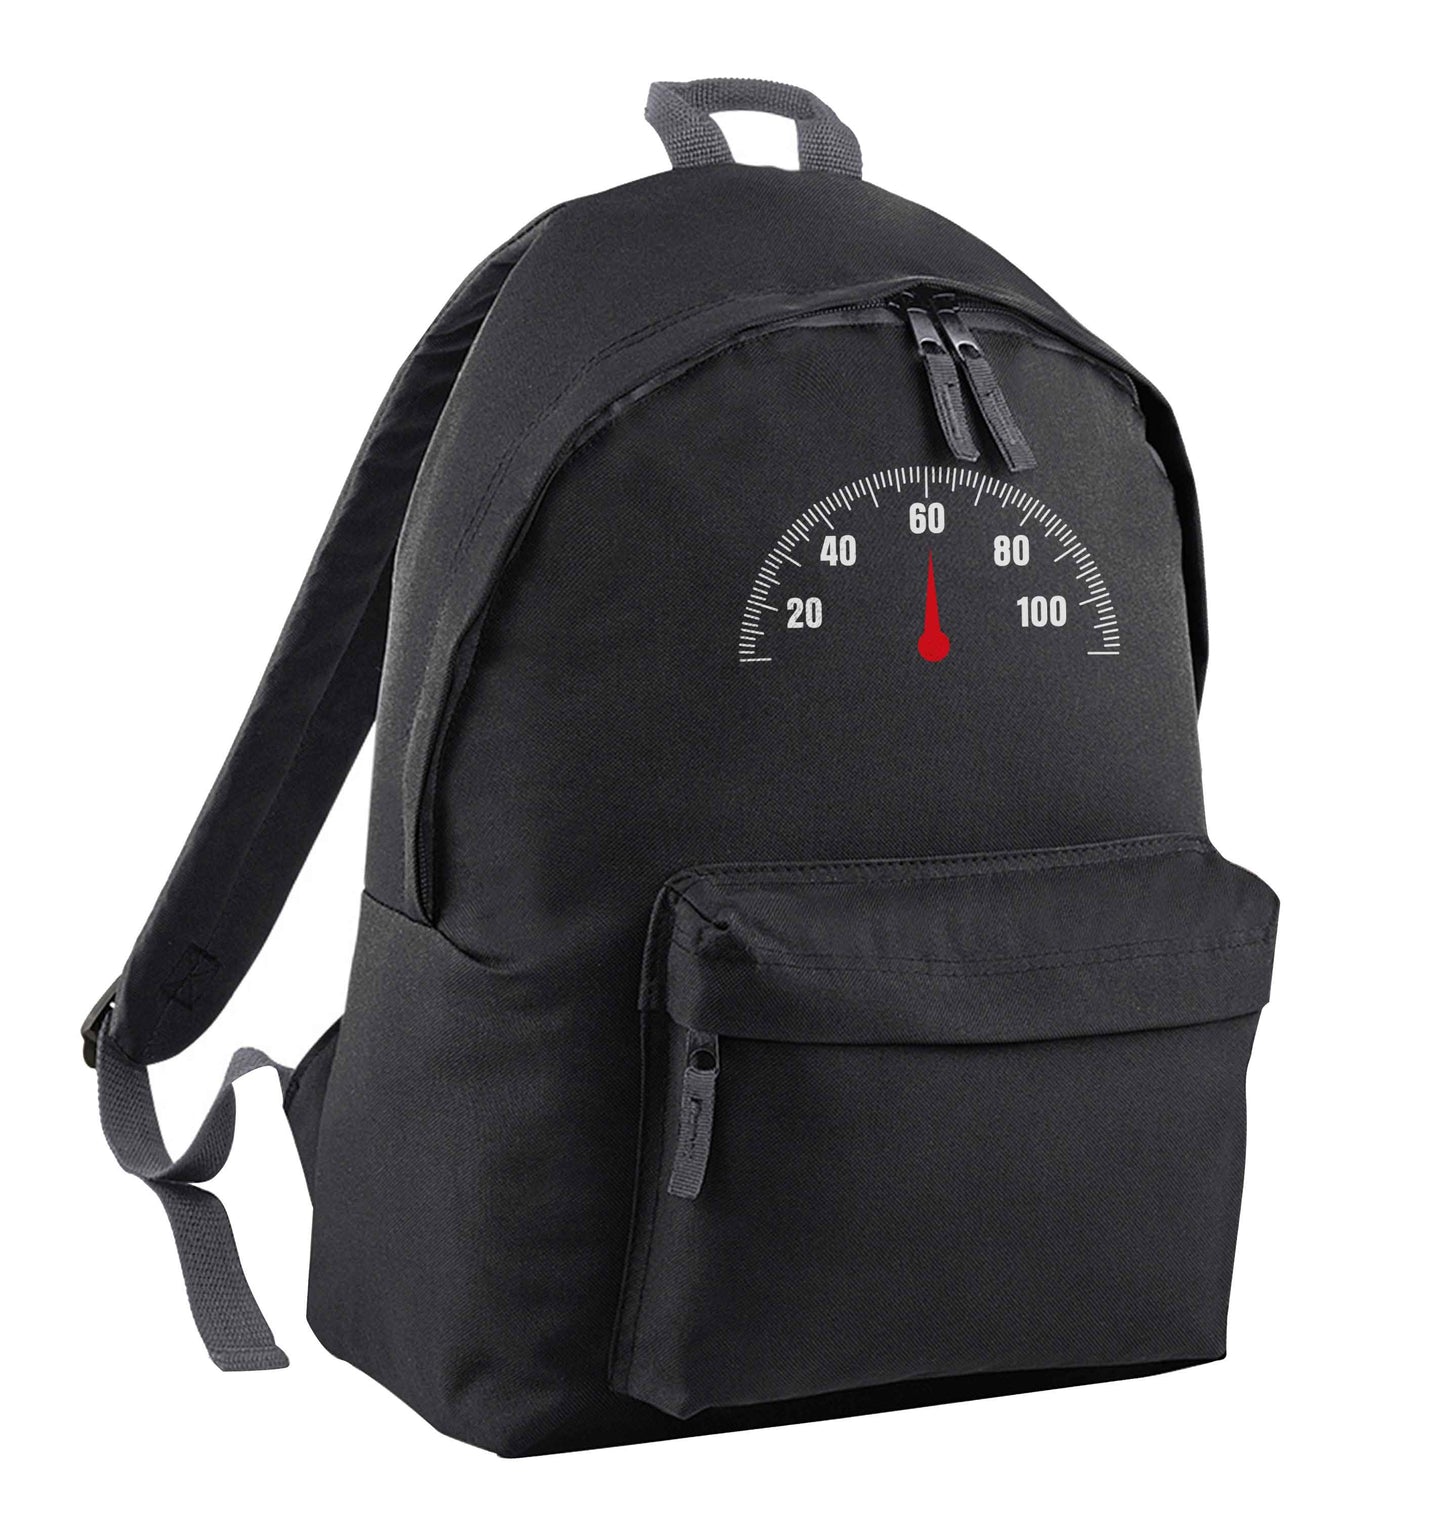 Speed dial 60 black adults backpack